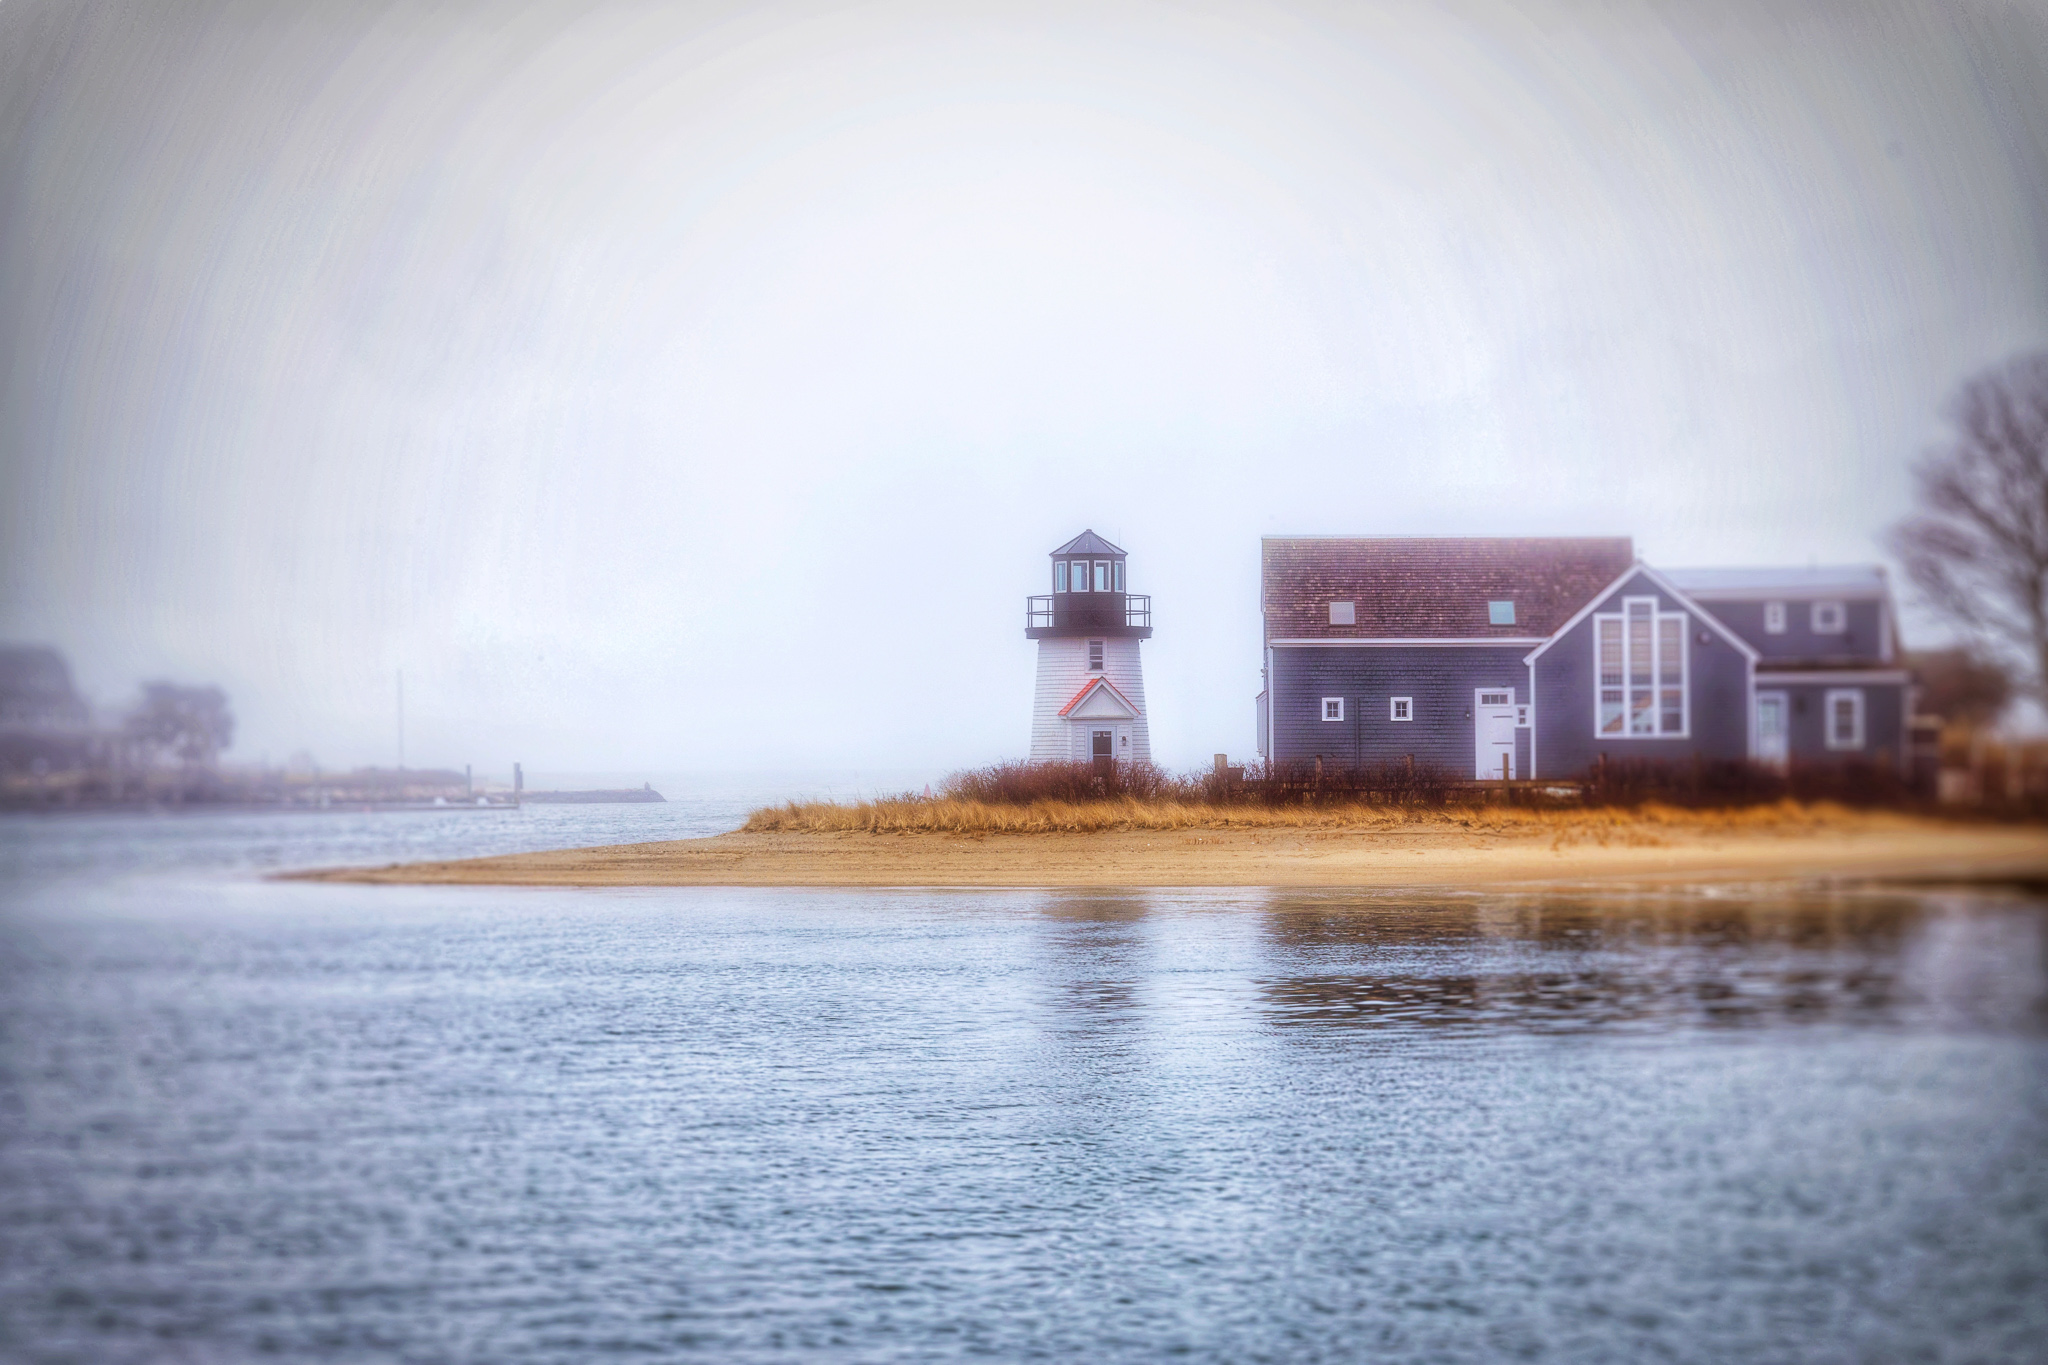 Cloudy day in Hyannis